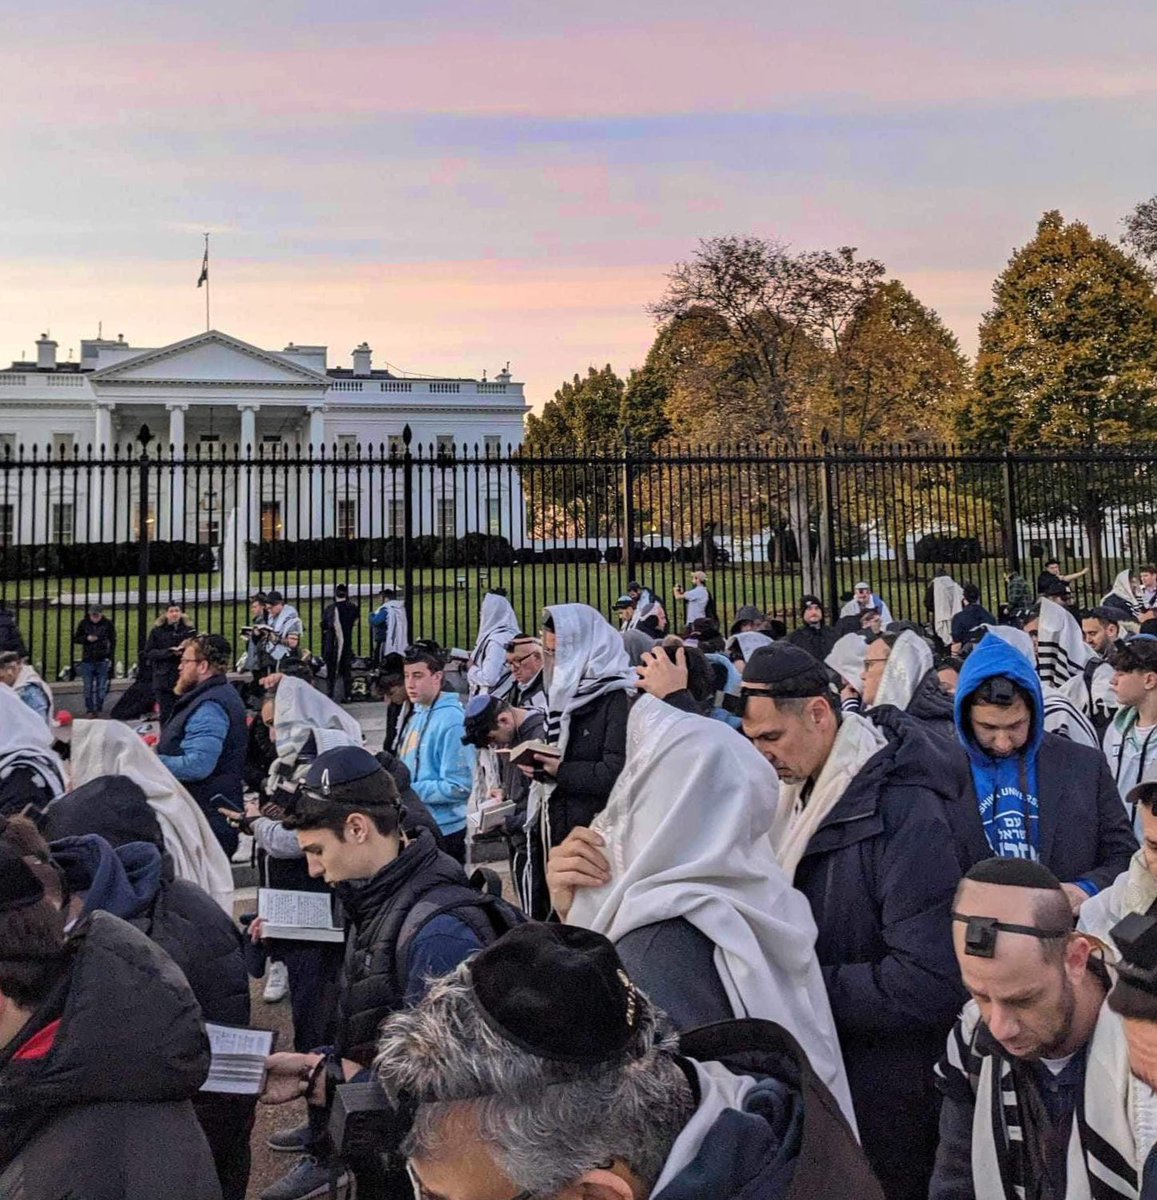 It begins. Thousands of Jews show up in Washington DC for the march, but first? A collective meeting with the CEO. They pray to their Creator. Not too difficult to spot the difference between pro Israel marches and Pro Palestinian marches.